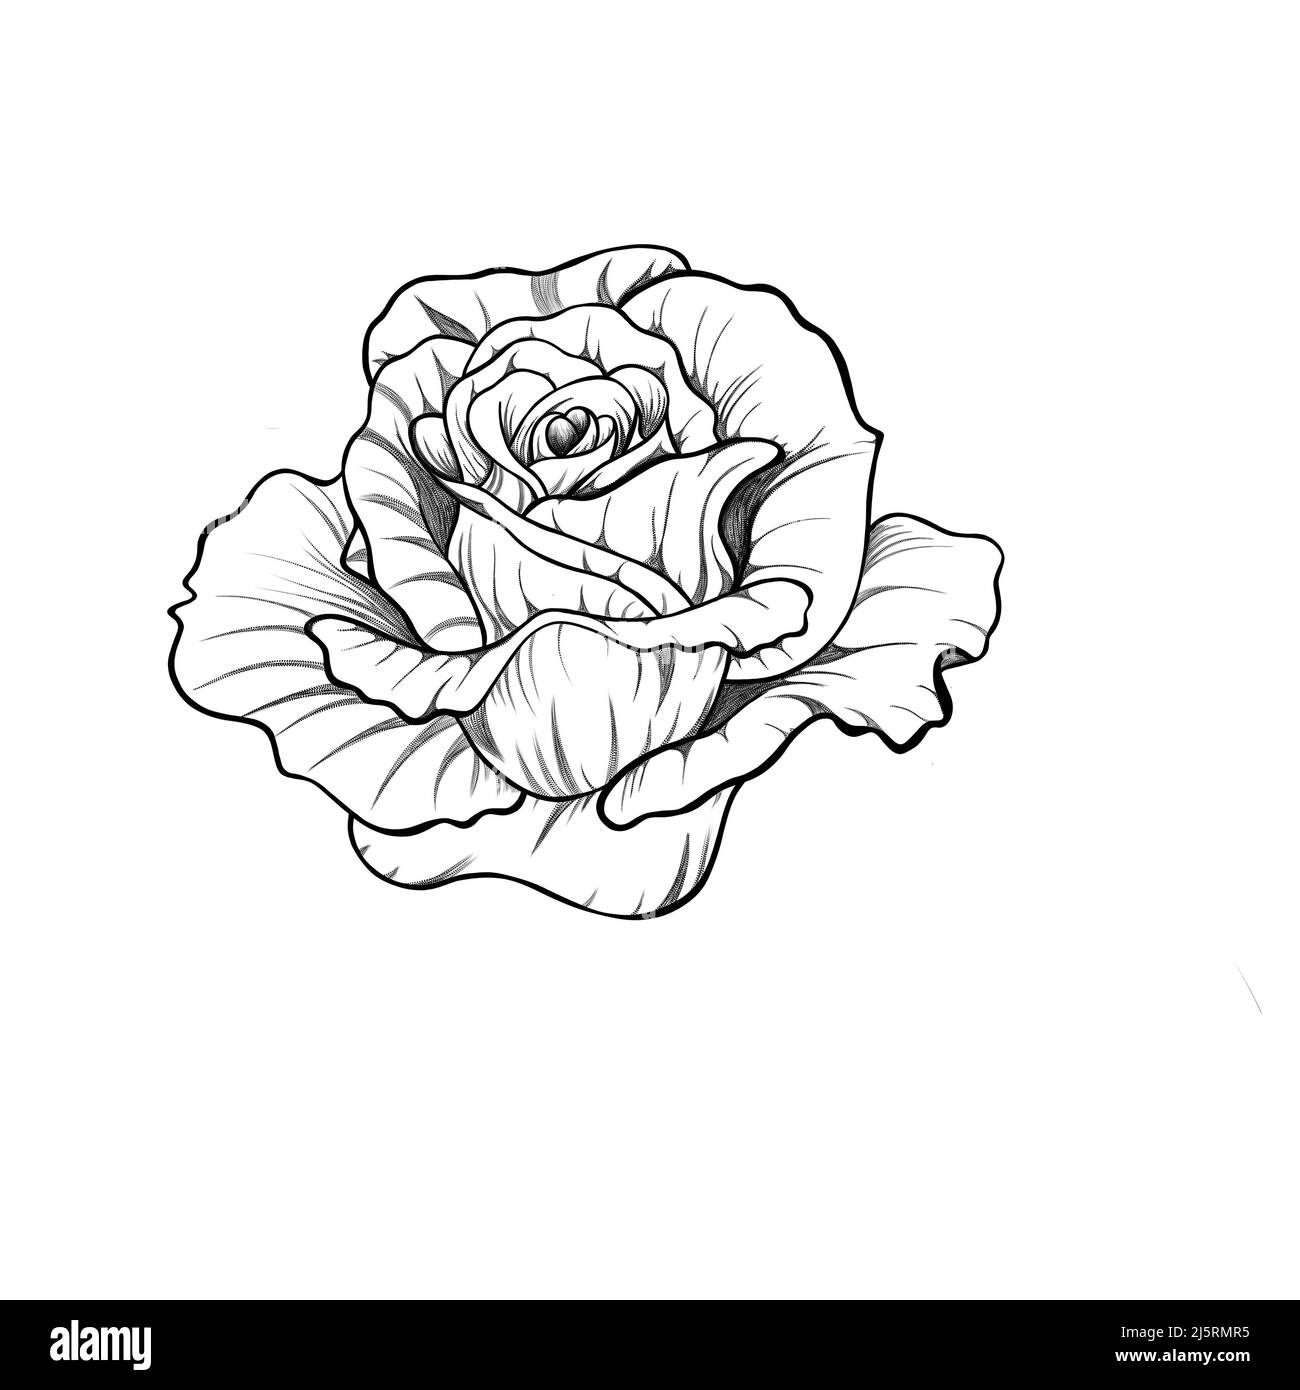 Freehand Rose Tattoo Drawing